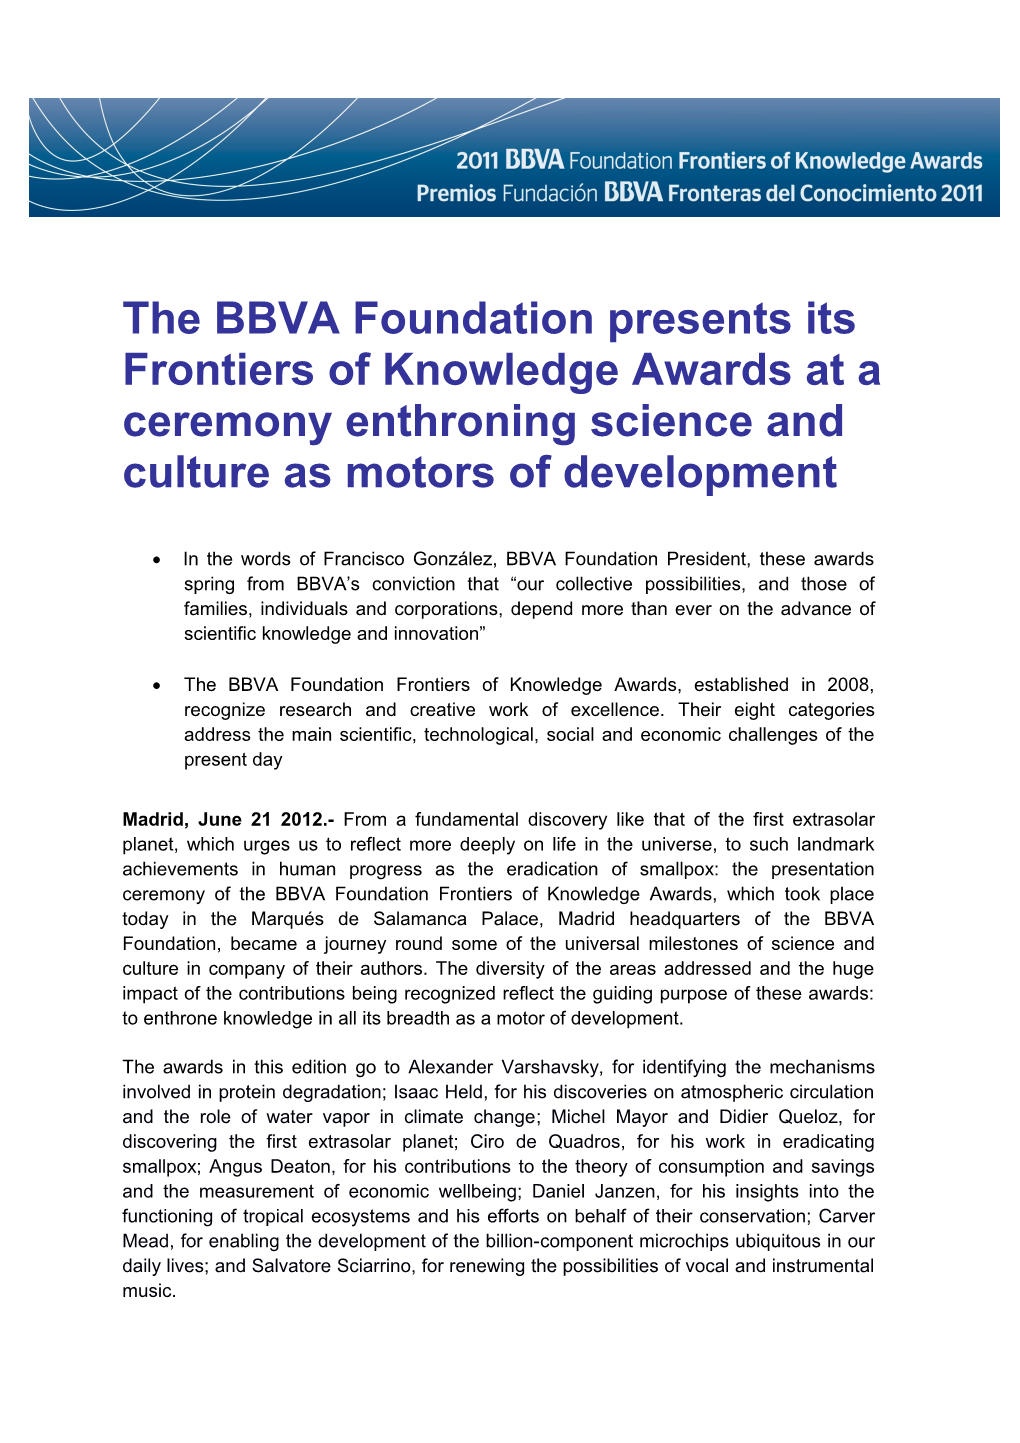 The BBVA Foundation Presents Its Frontiers of Knowledge Awards at a Ceremony Enthroning